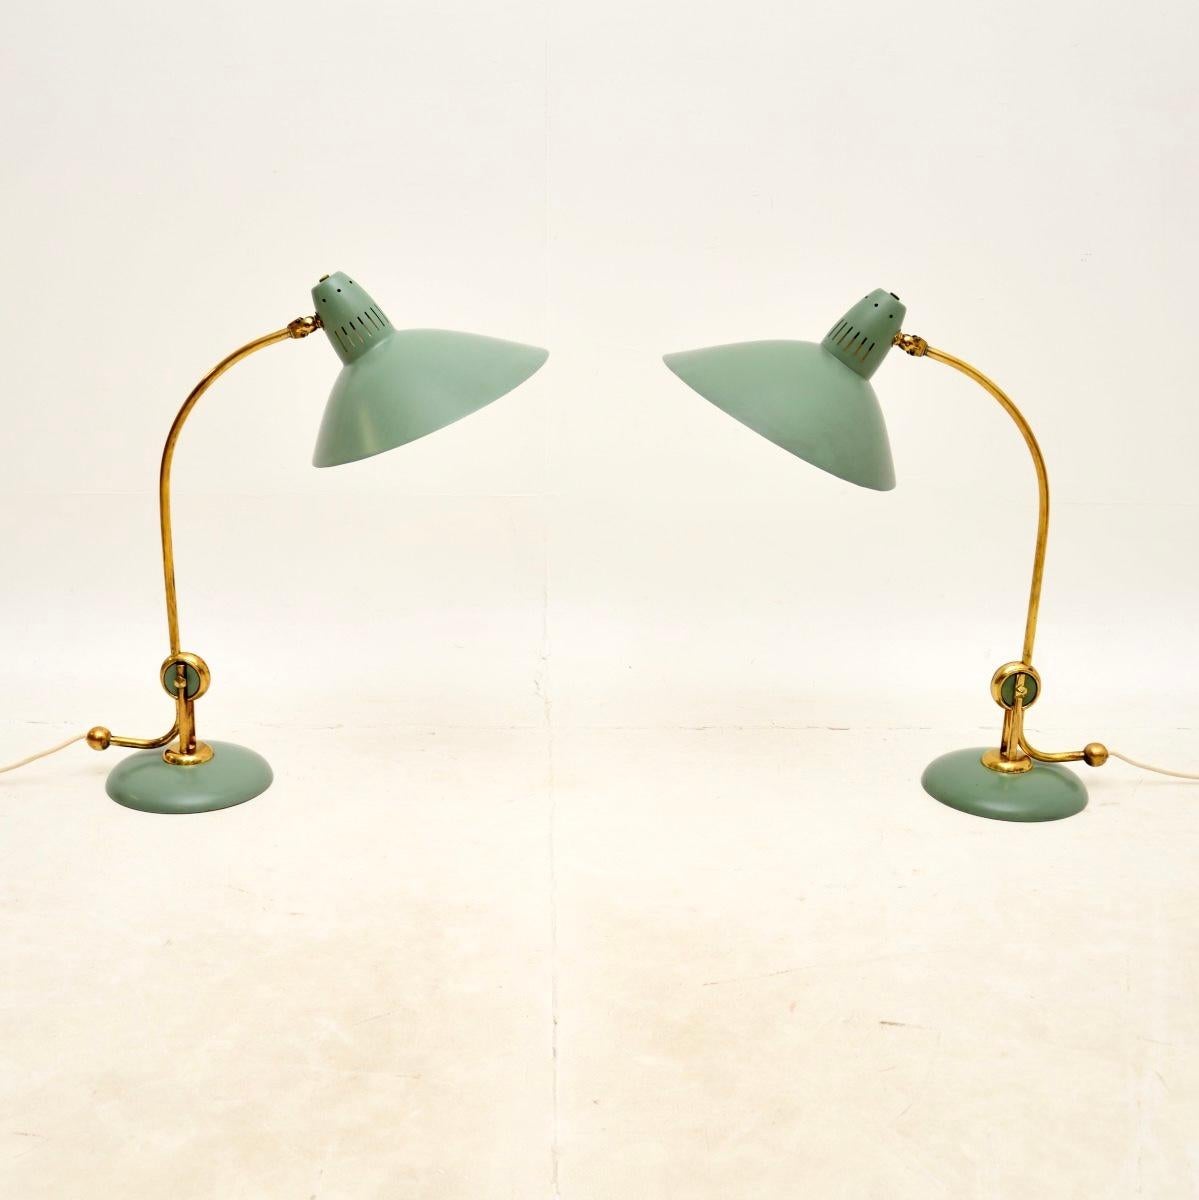 A stunning pair of vintage table lamps by Hala Zeist, made in Germany and dating from the 1950’s.

The quality is superb and they have an incredibly stylish design. They are made from brass and mint green metal, the shades have a fabulous flying